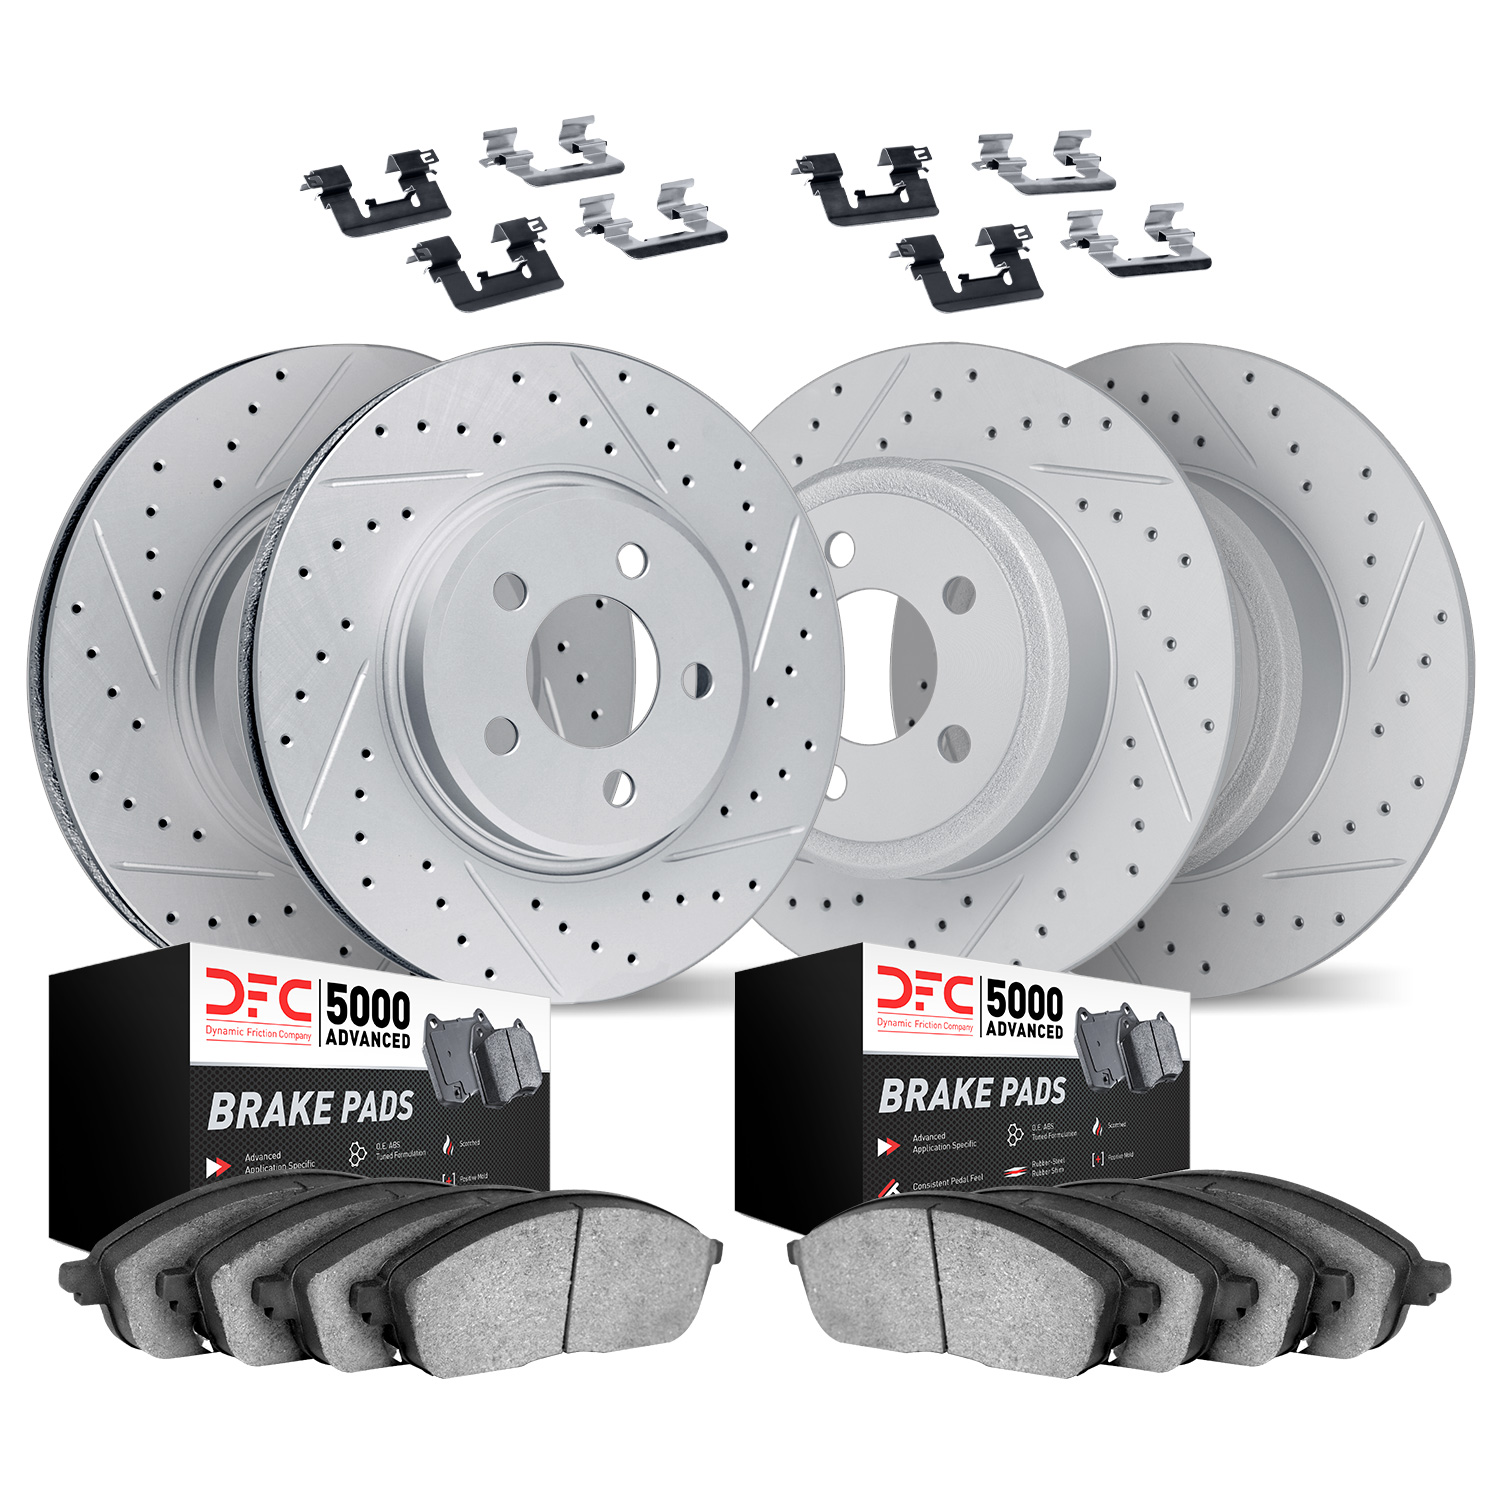 2514-27002 Geoperformance Drilled/Slotted Rotors w/5000 Advanced Brake Pads Kit & Hardware, 1976-1993 Volvo, Position: Front and